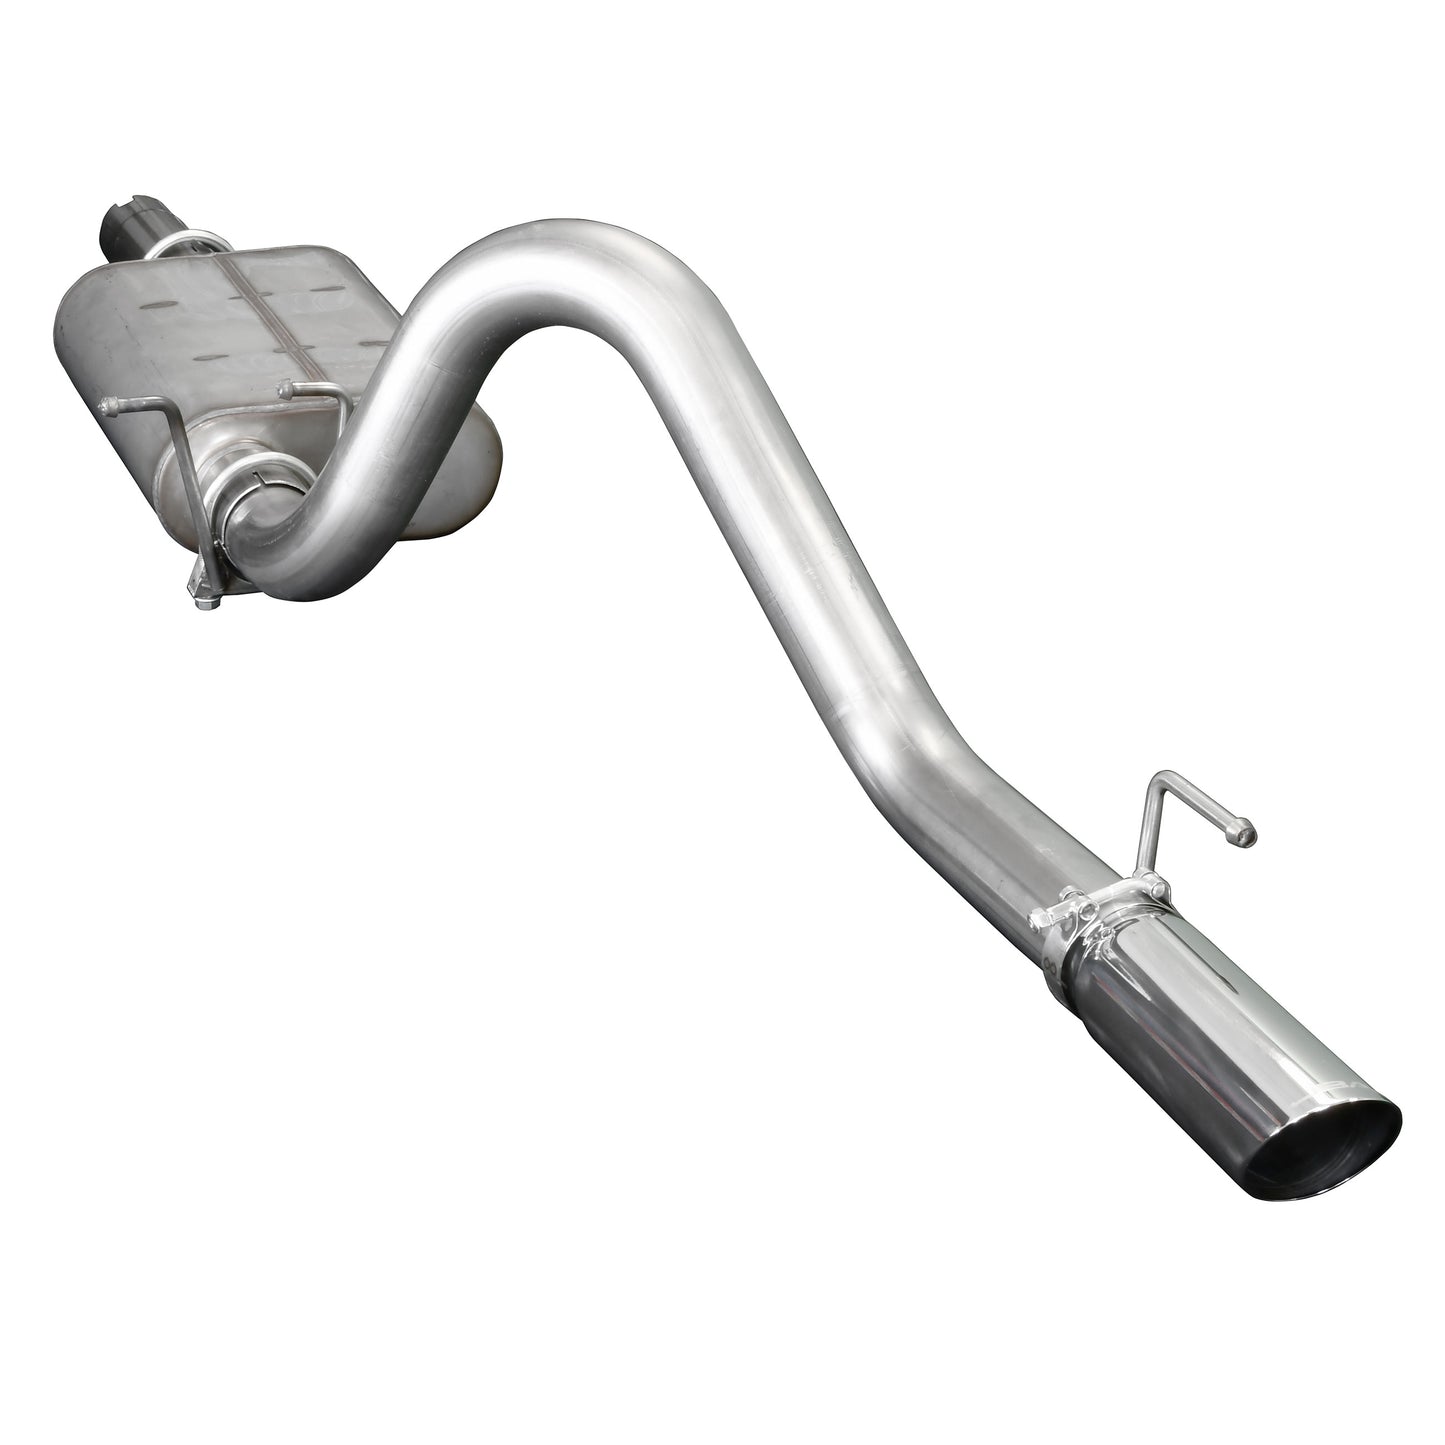 JBA Performance Exhaust 30-1502 2.5" Stainless Steel Exhaust System 87-96 Jeep Wrangler YJ